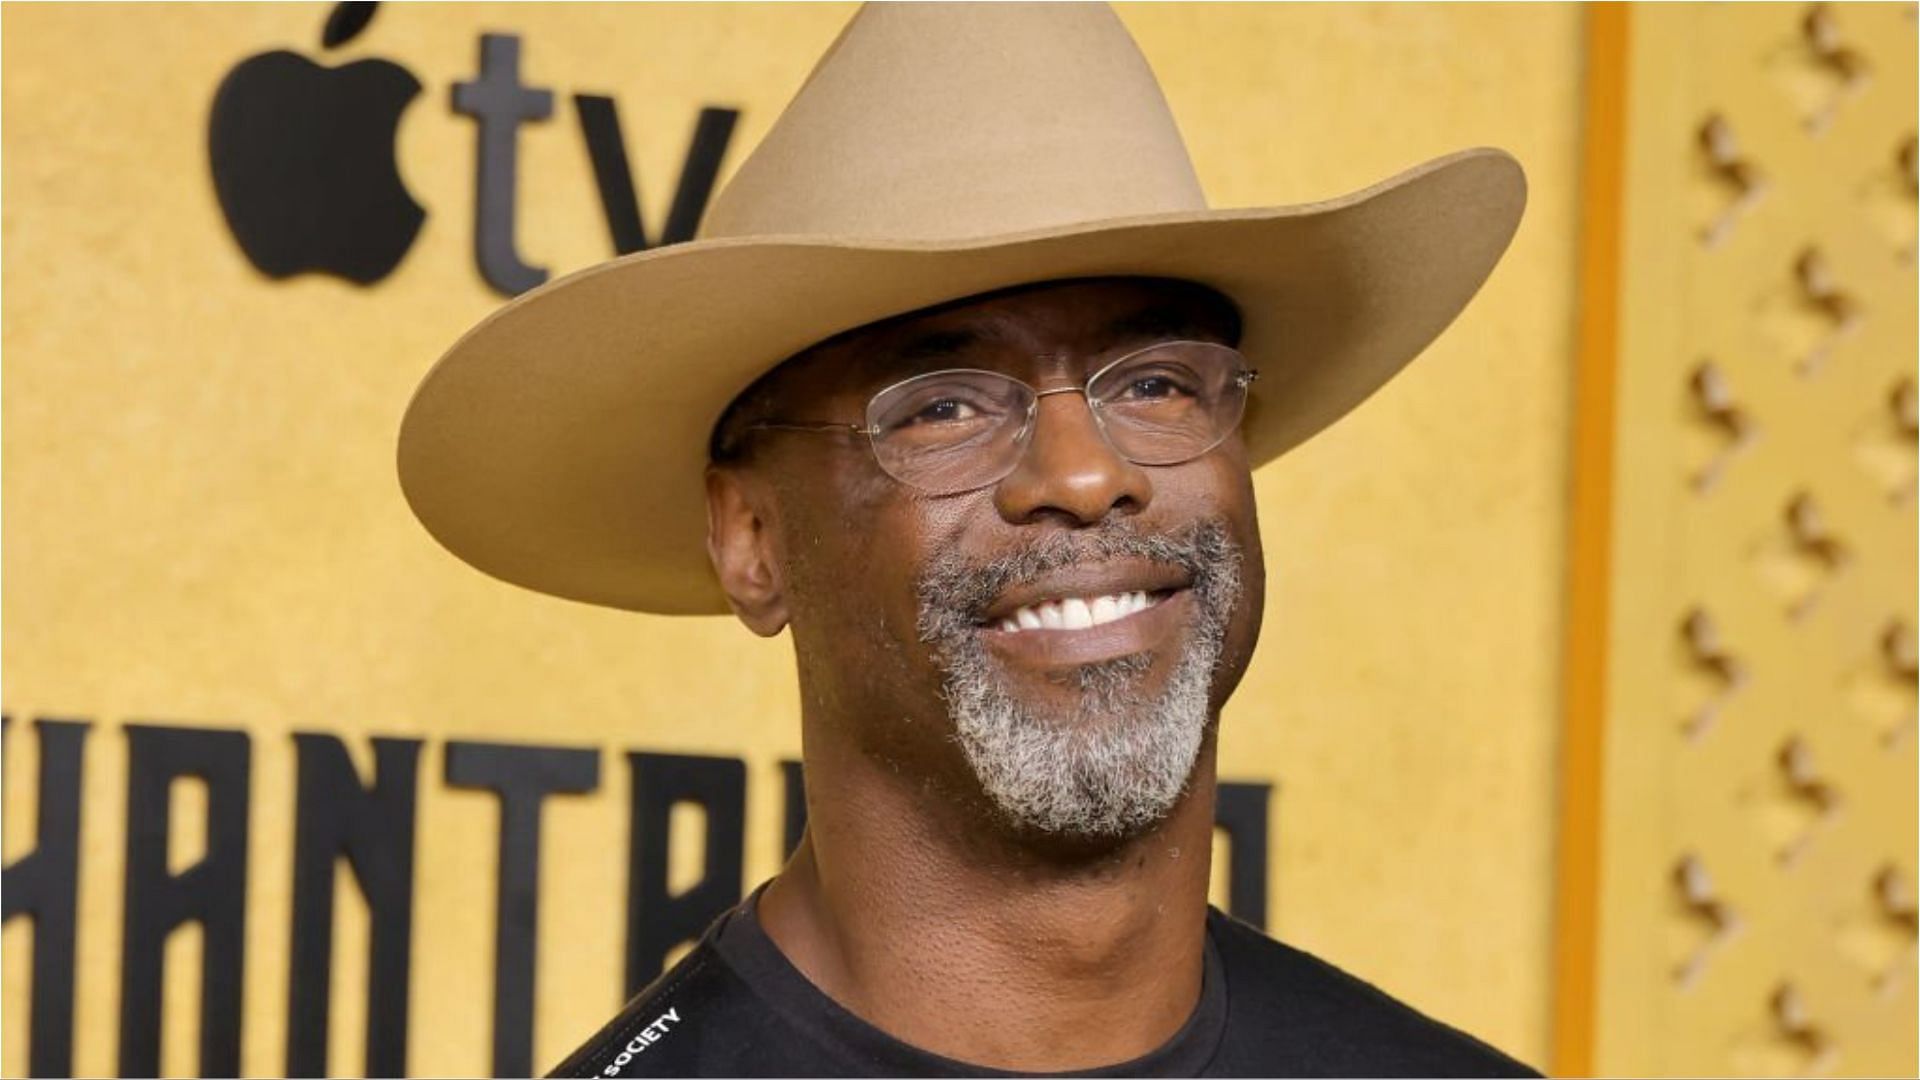 Isaiah Washington has retired from acting (Image via Amy Sussman/Getty Images)